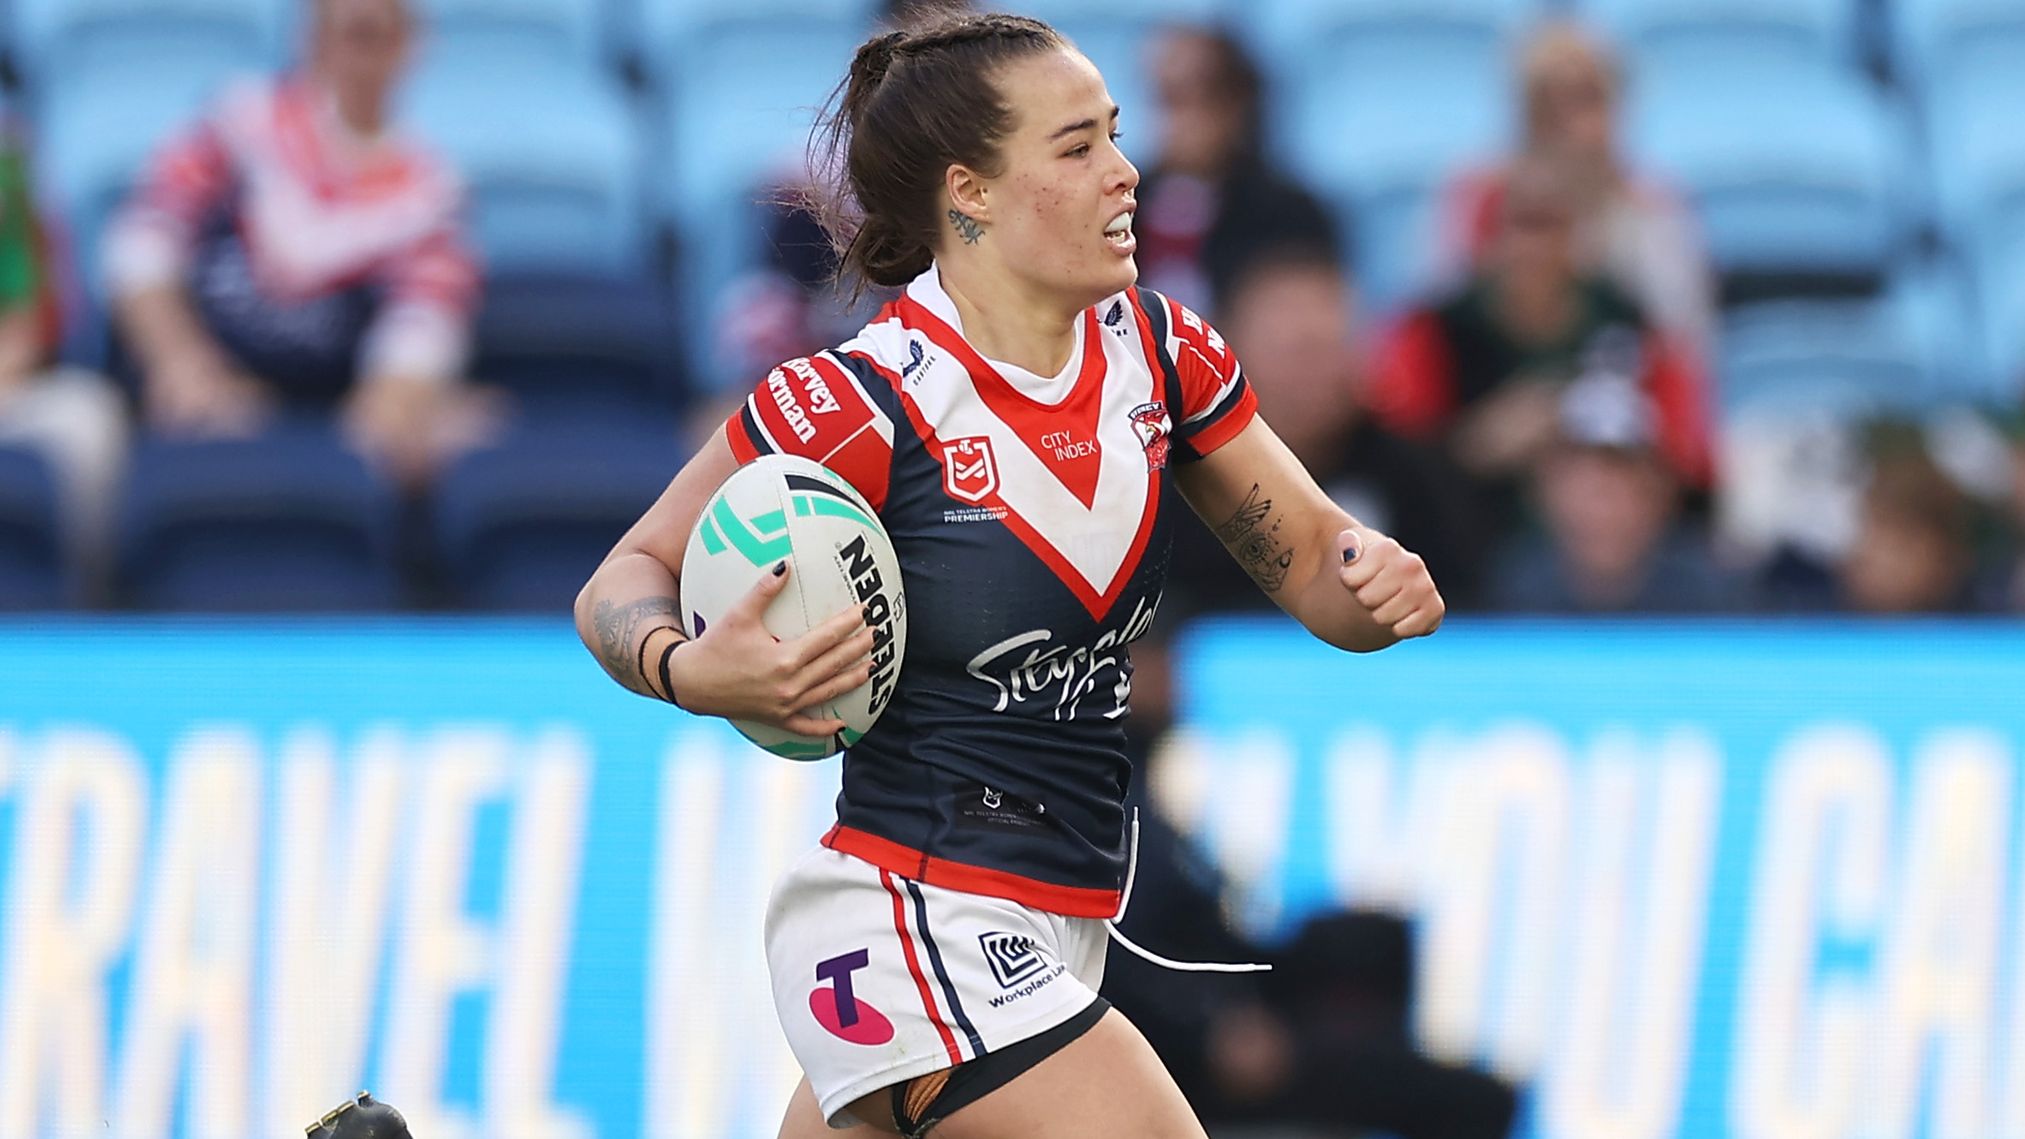 Isabelle Kelly of the Roosters breaks away to score a try against the Knights.